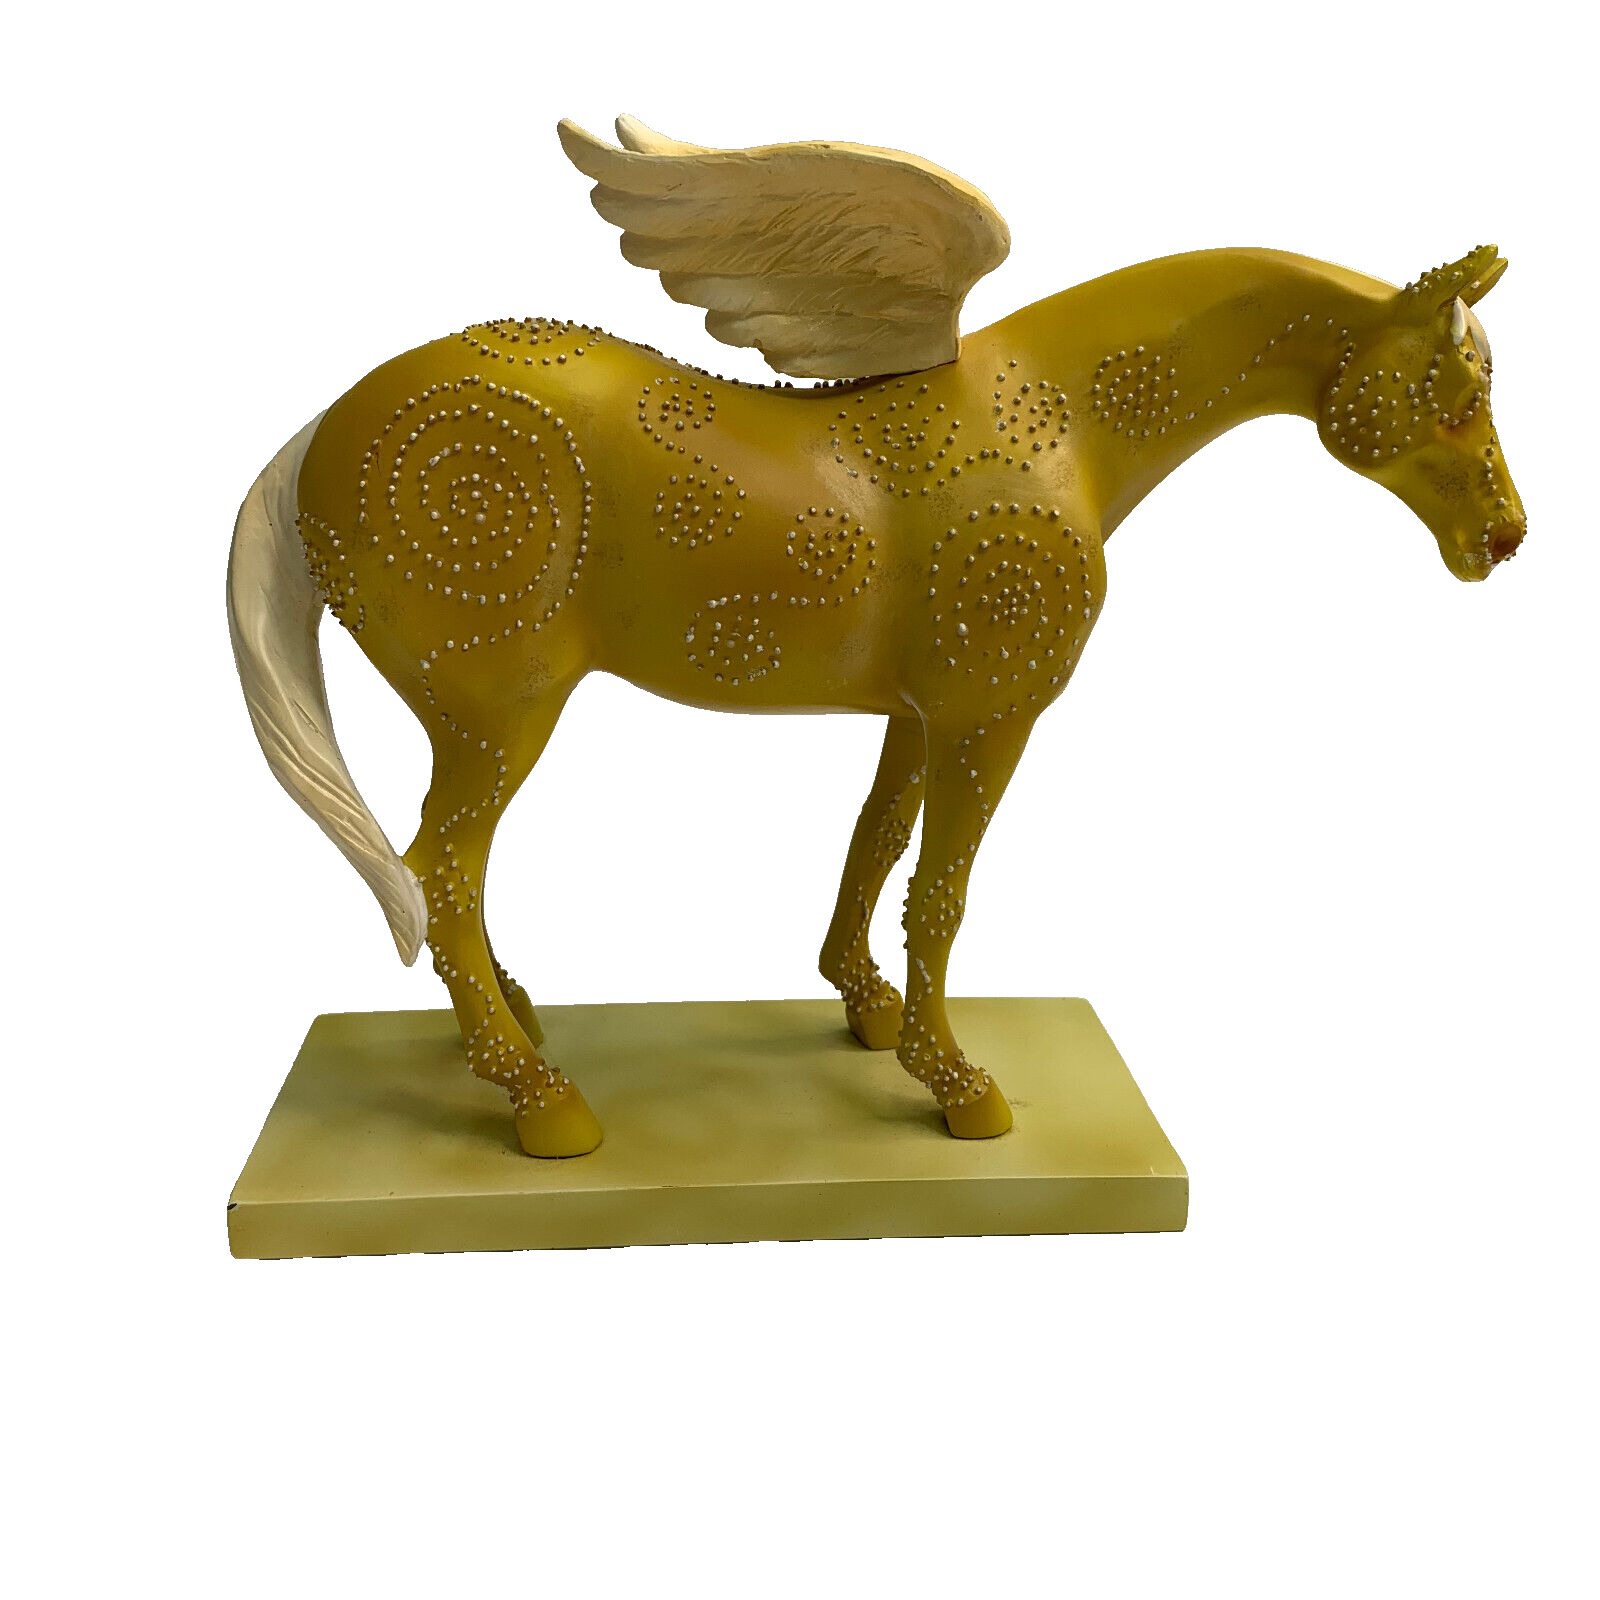 The Tail of Painted Ponies 12204 Golden Girl Joy Steuerwald 2004 Rare LE 4407